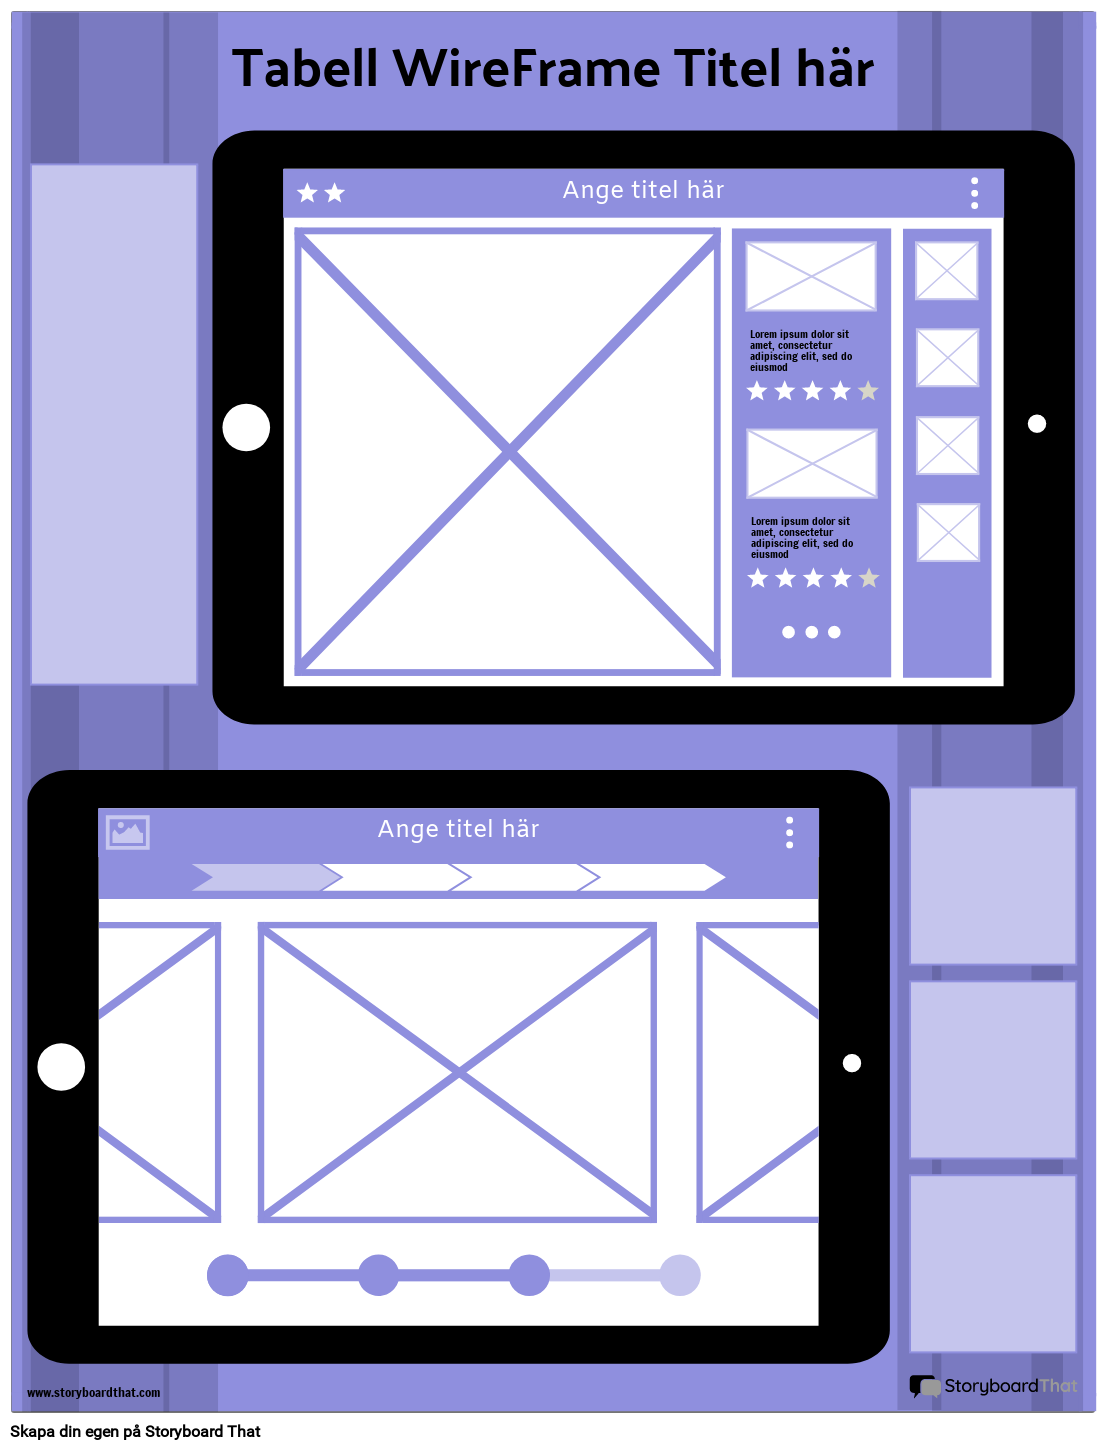 Corporate Tablet WireFrame Mall 4